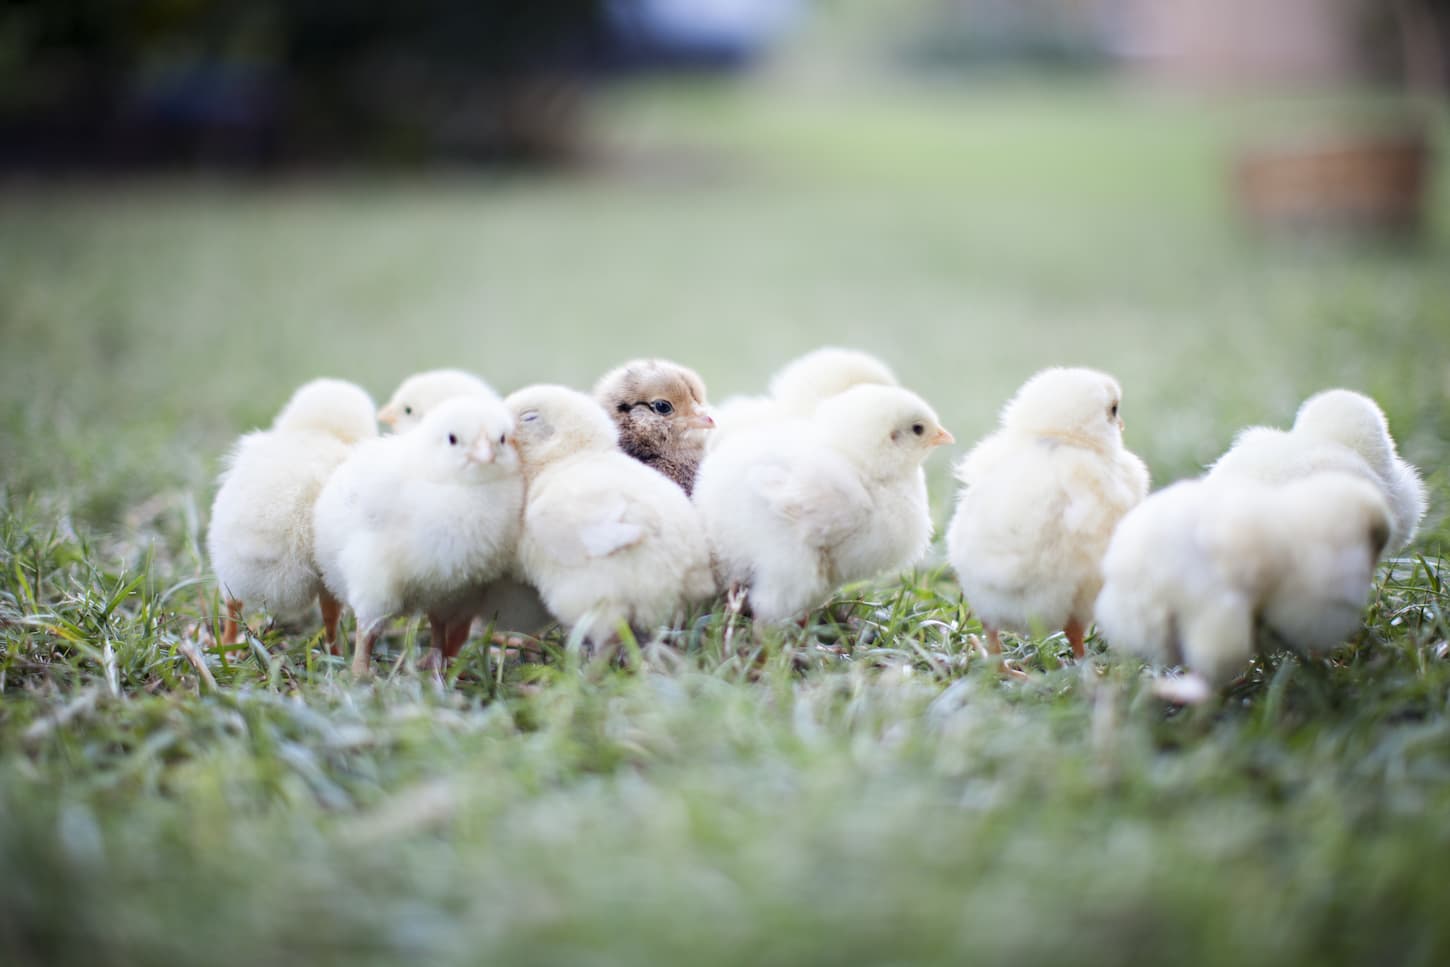 An image of baby chicks in an open grass area.